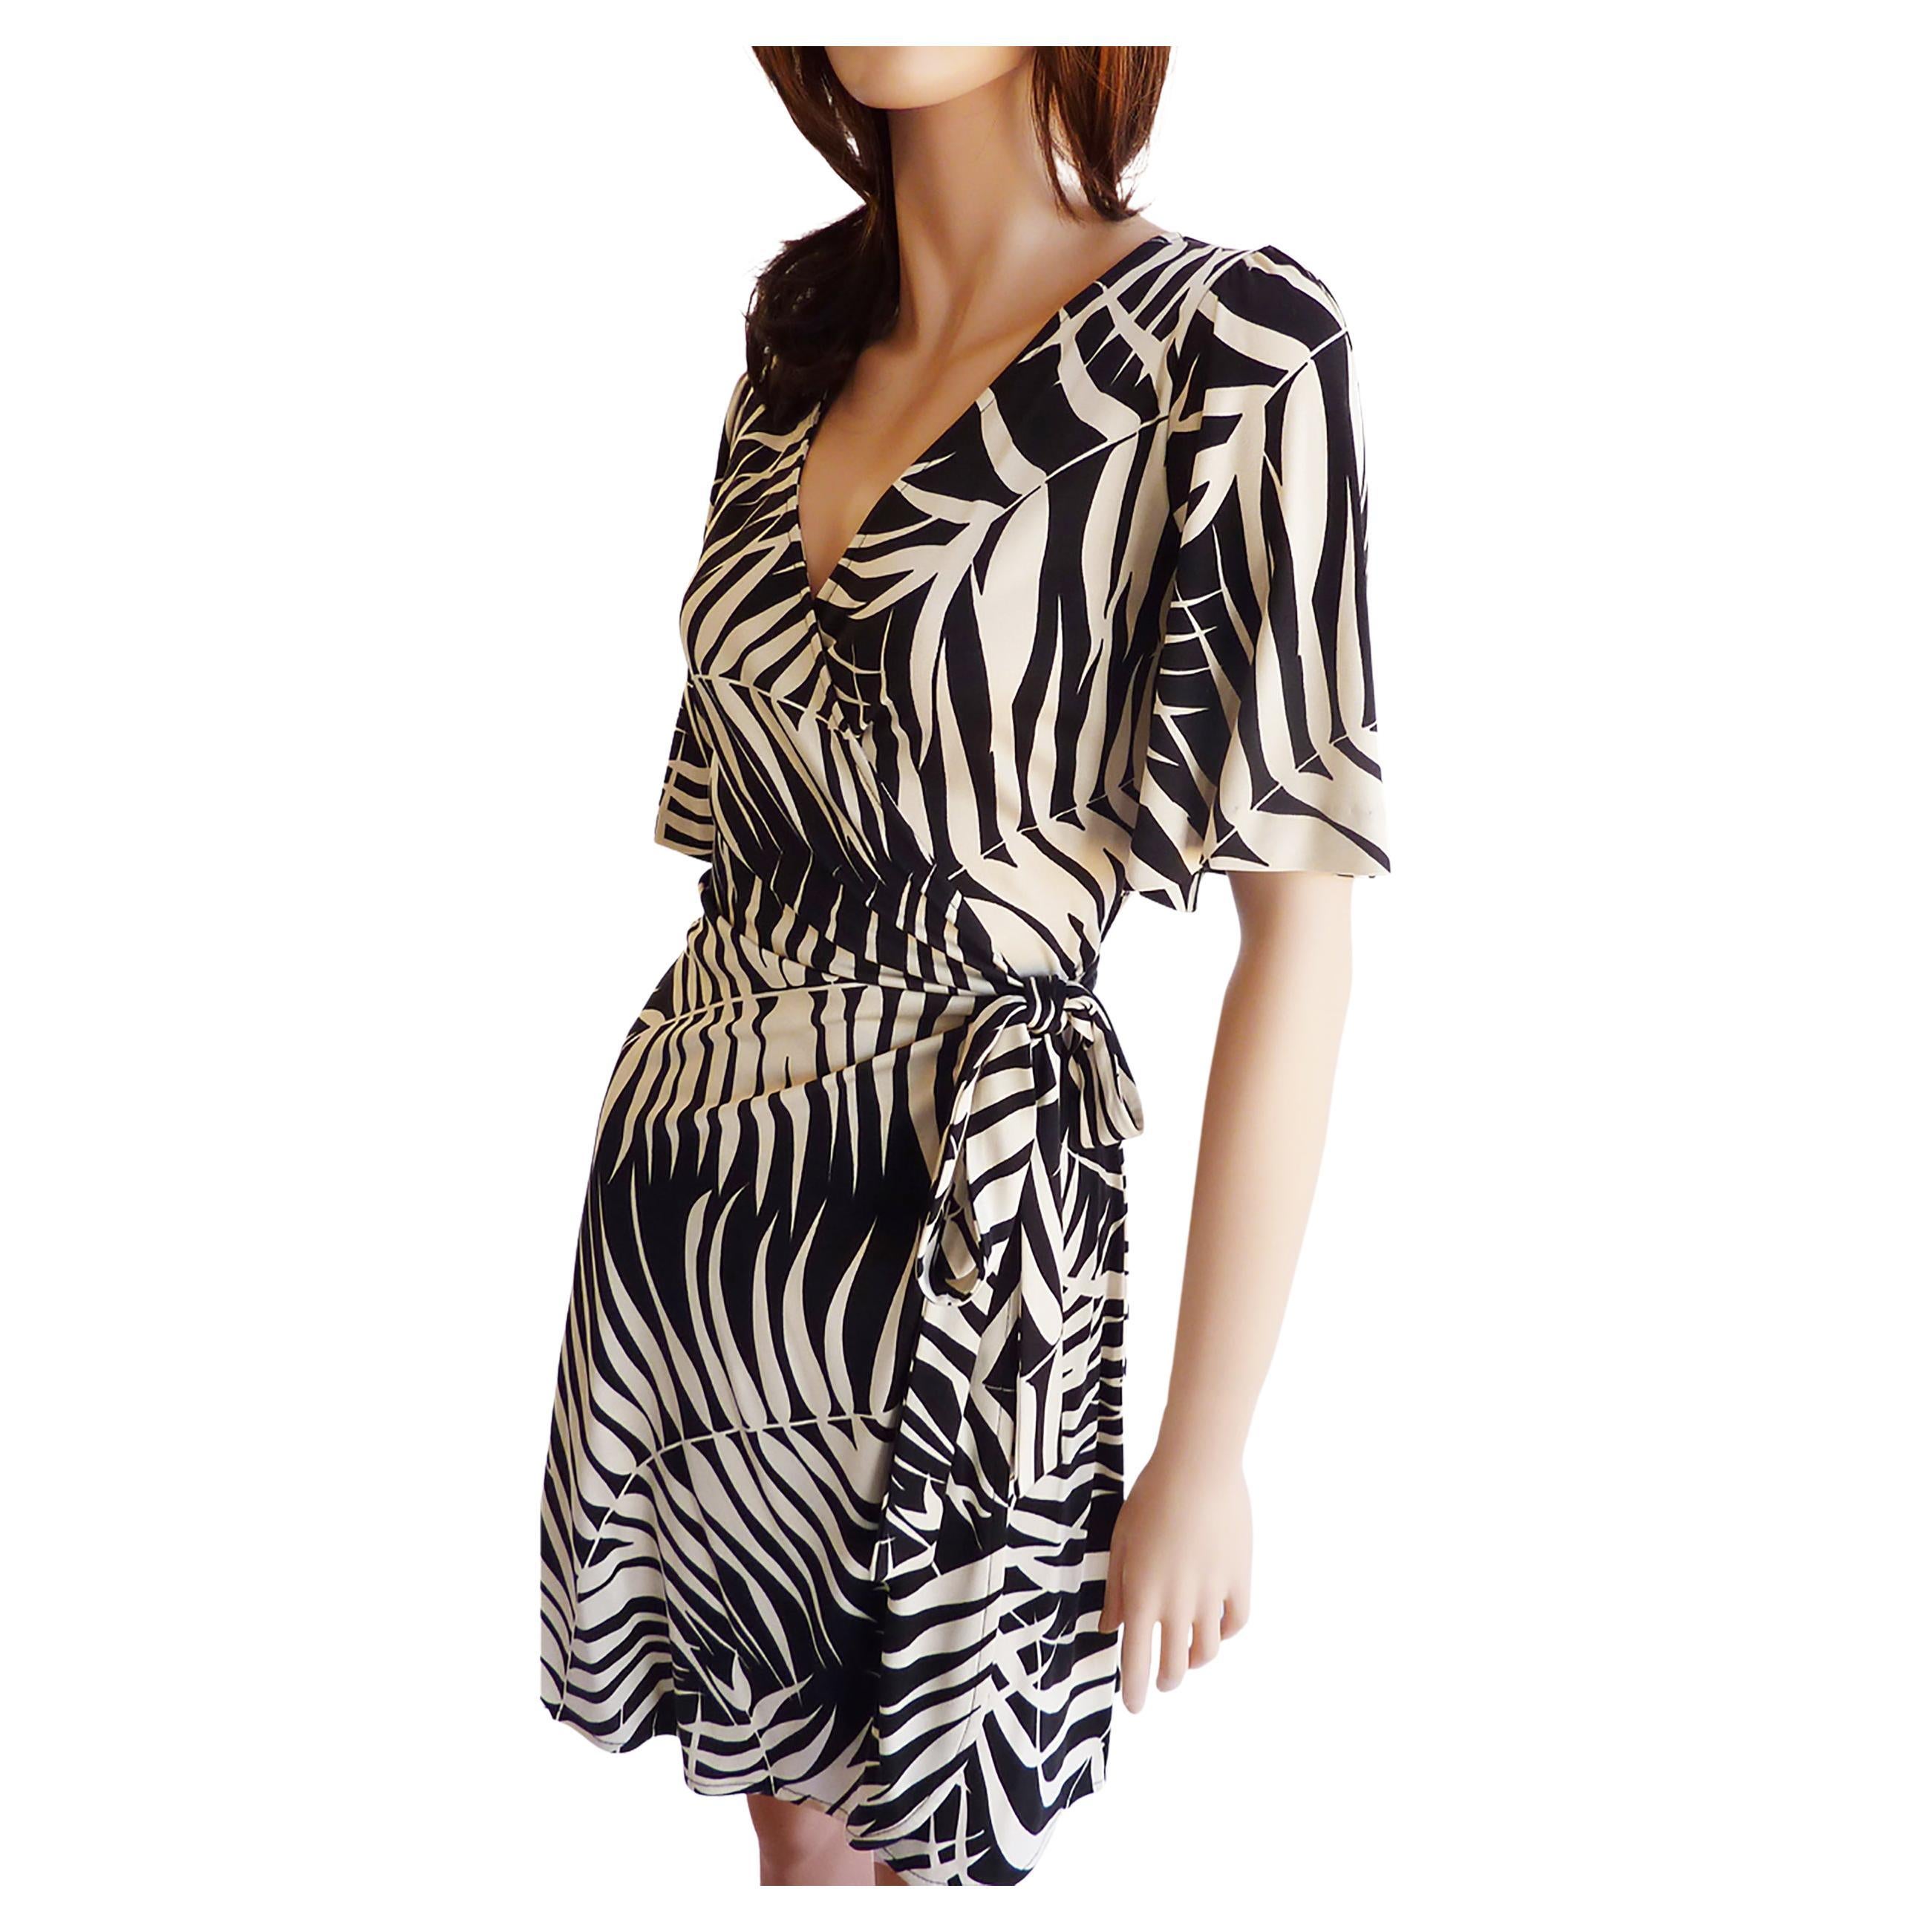 Versatile little true wrap dress with flattering flare sleeves.
Beautiful volume with every movement.  
In Flora's hand-signed, original ecru/black fern print.
Approximately 37